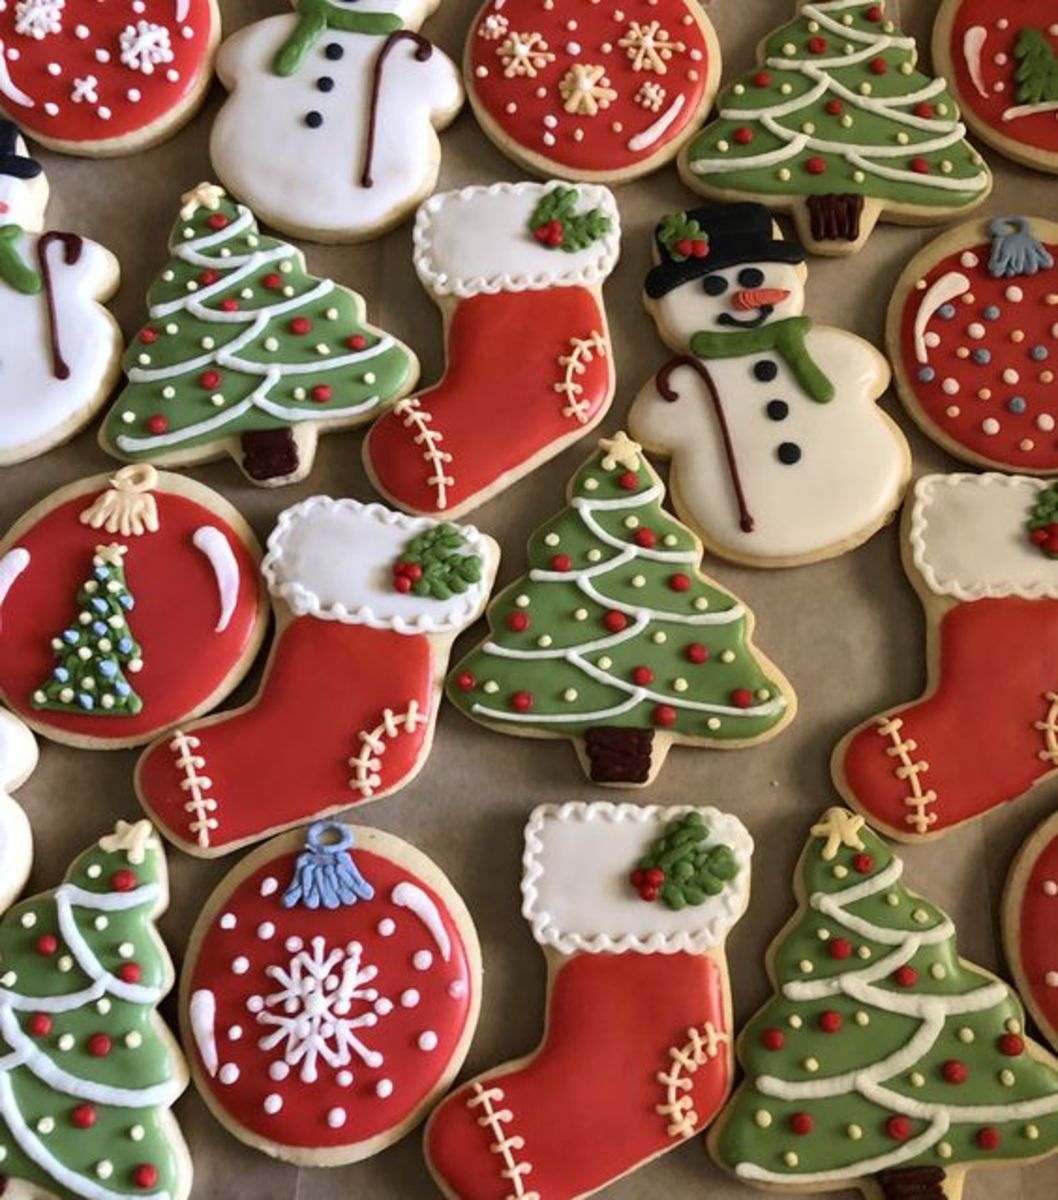 Christmas-themed decorated sugar cookies